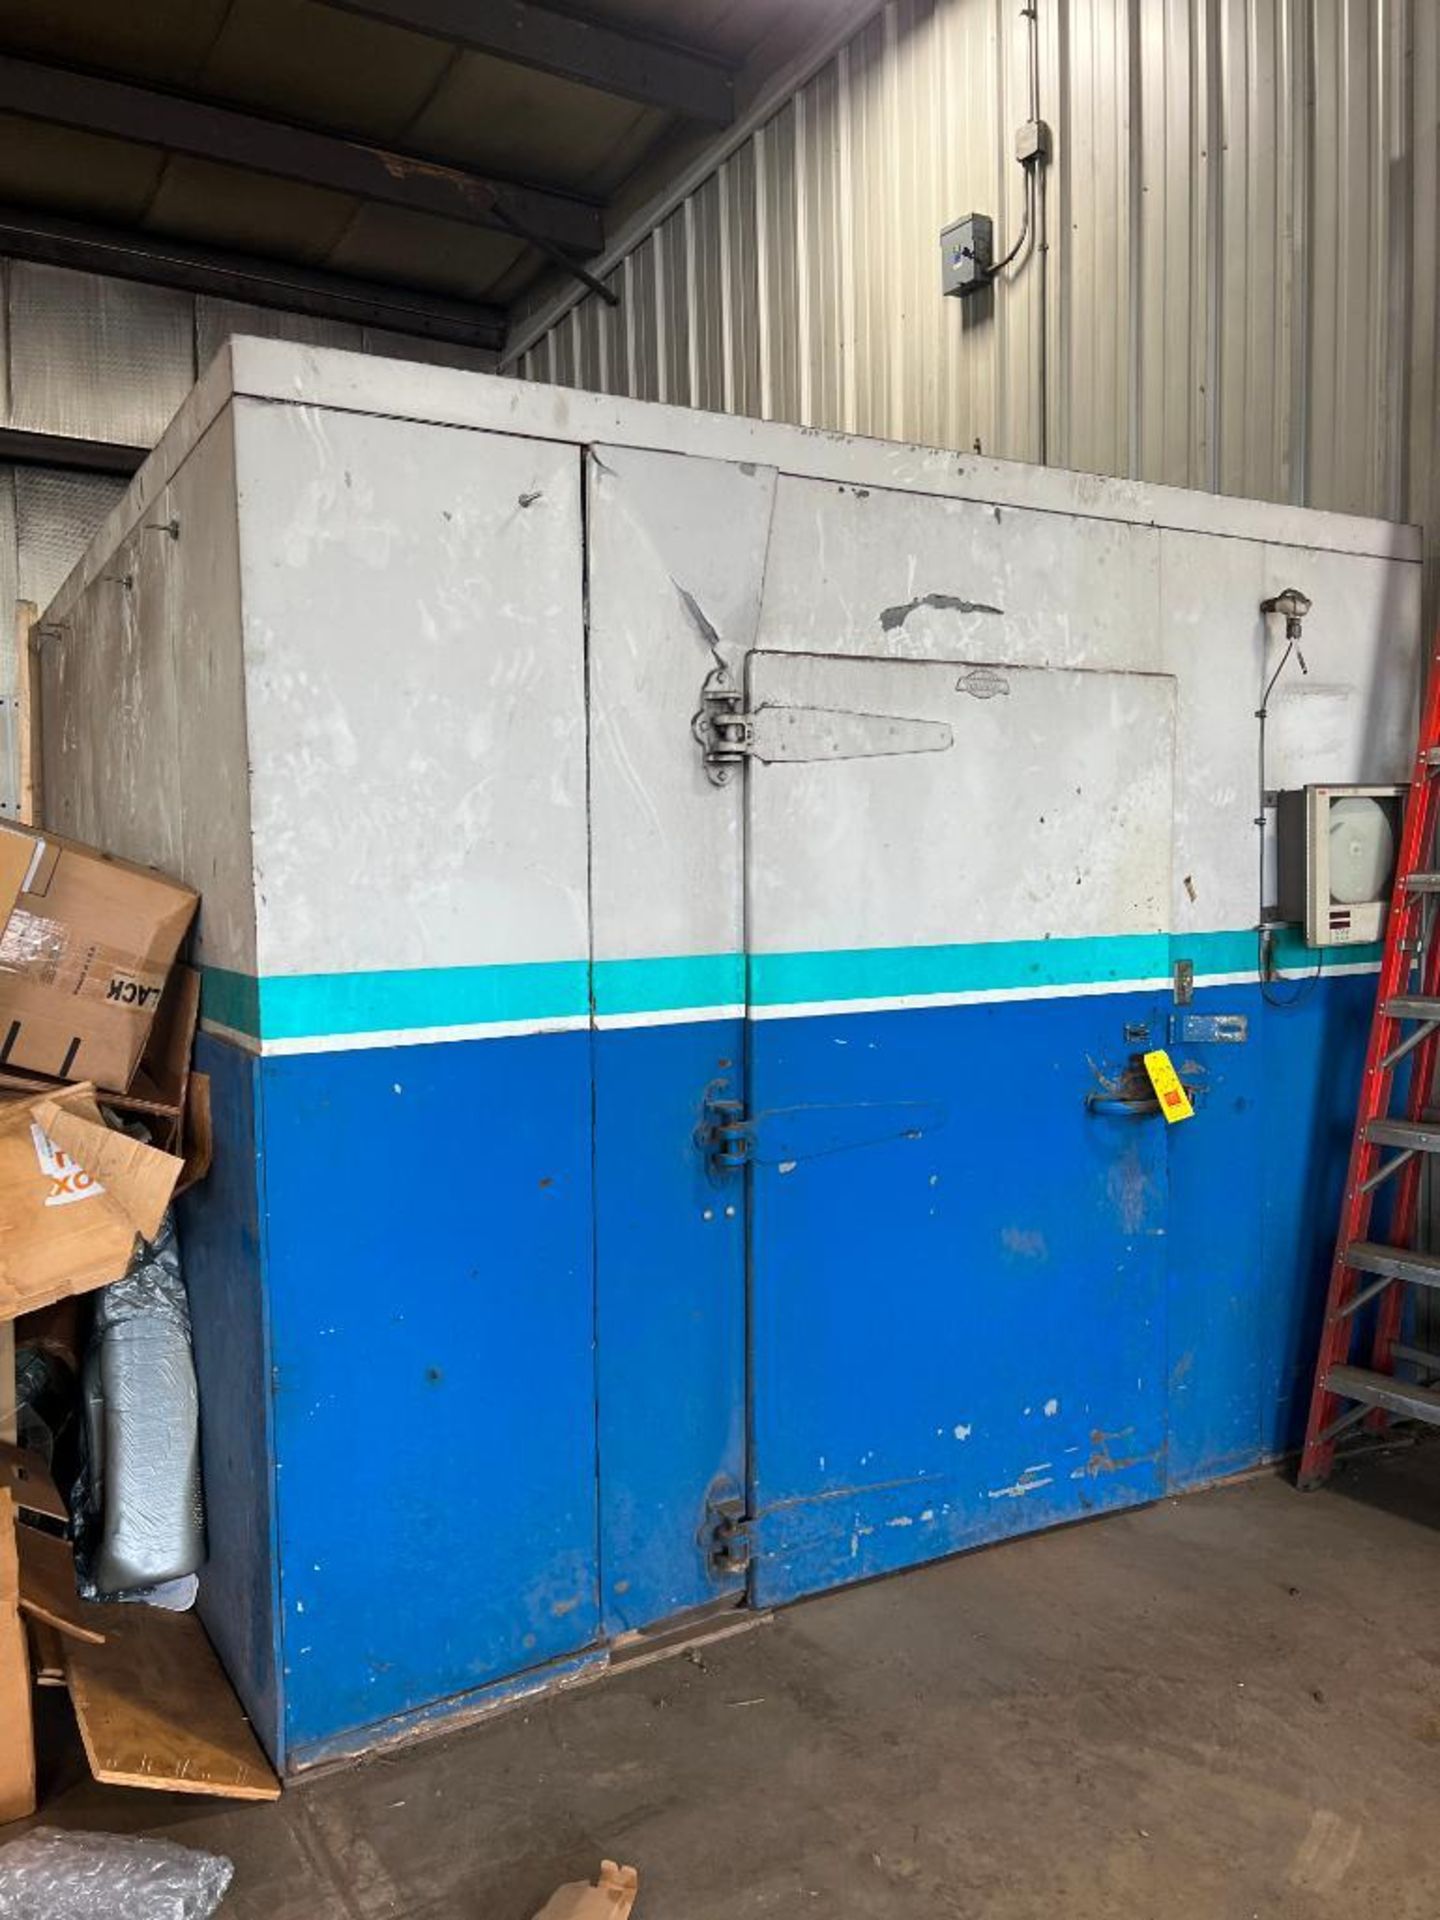 Federal Walk-In Cooler with Evaporative Cooler, Dimensions = 11' x 10' x 94" - Rigging Fees: $2200